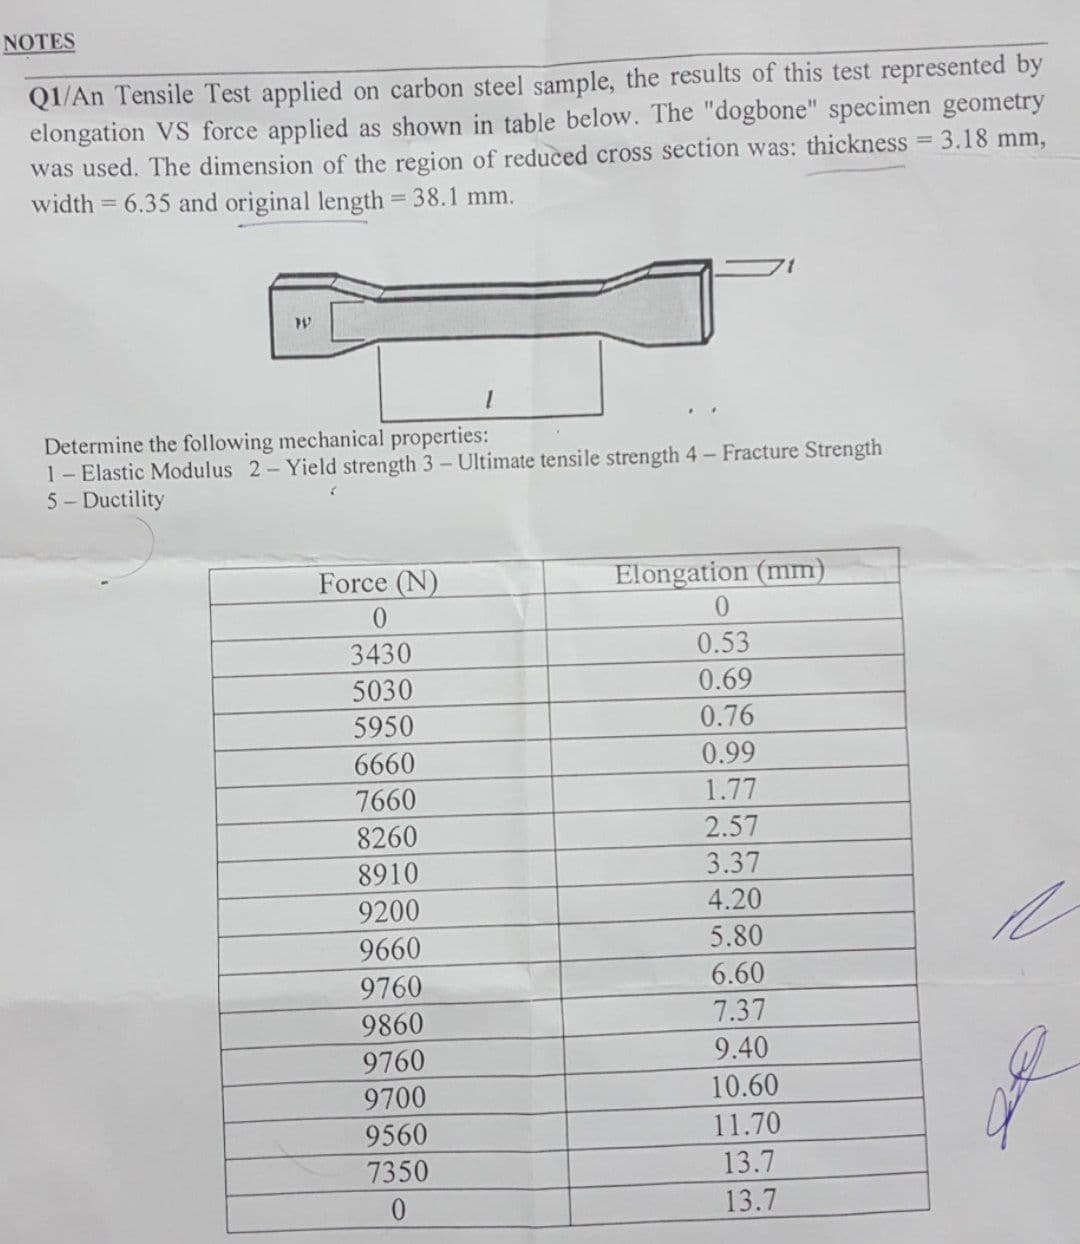 NOTES
Q1/An Tensile Test applied on carbon steel sample, the results of this test represented by
elongation VS force applied as shown in table below. The "dogbone" specimen geometry
was used. The dimension of the region of reduced cross section was: thickness = 3.18 mm,
width = 6.35 and original length = 38.1 mm.
Determine the following mechanical properties:
1- Elastic Modulus 2- Yield strength 3- Ultimate tensile strength 4- Fracture Strength
5 - Ductility
Force (N)
Elongation (mm)
0.
3430
0.53
5030
0.69
5950
0.76
6660
0.99
7660
1.77
2.57
8260
8910
3.37
9200
4.20
9660
5.80
9760
6.60
9860
7.37
9760
9.40
9700
10.60
9560
11.70
7350
13.7
13.7
